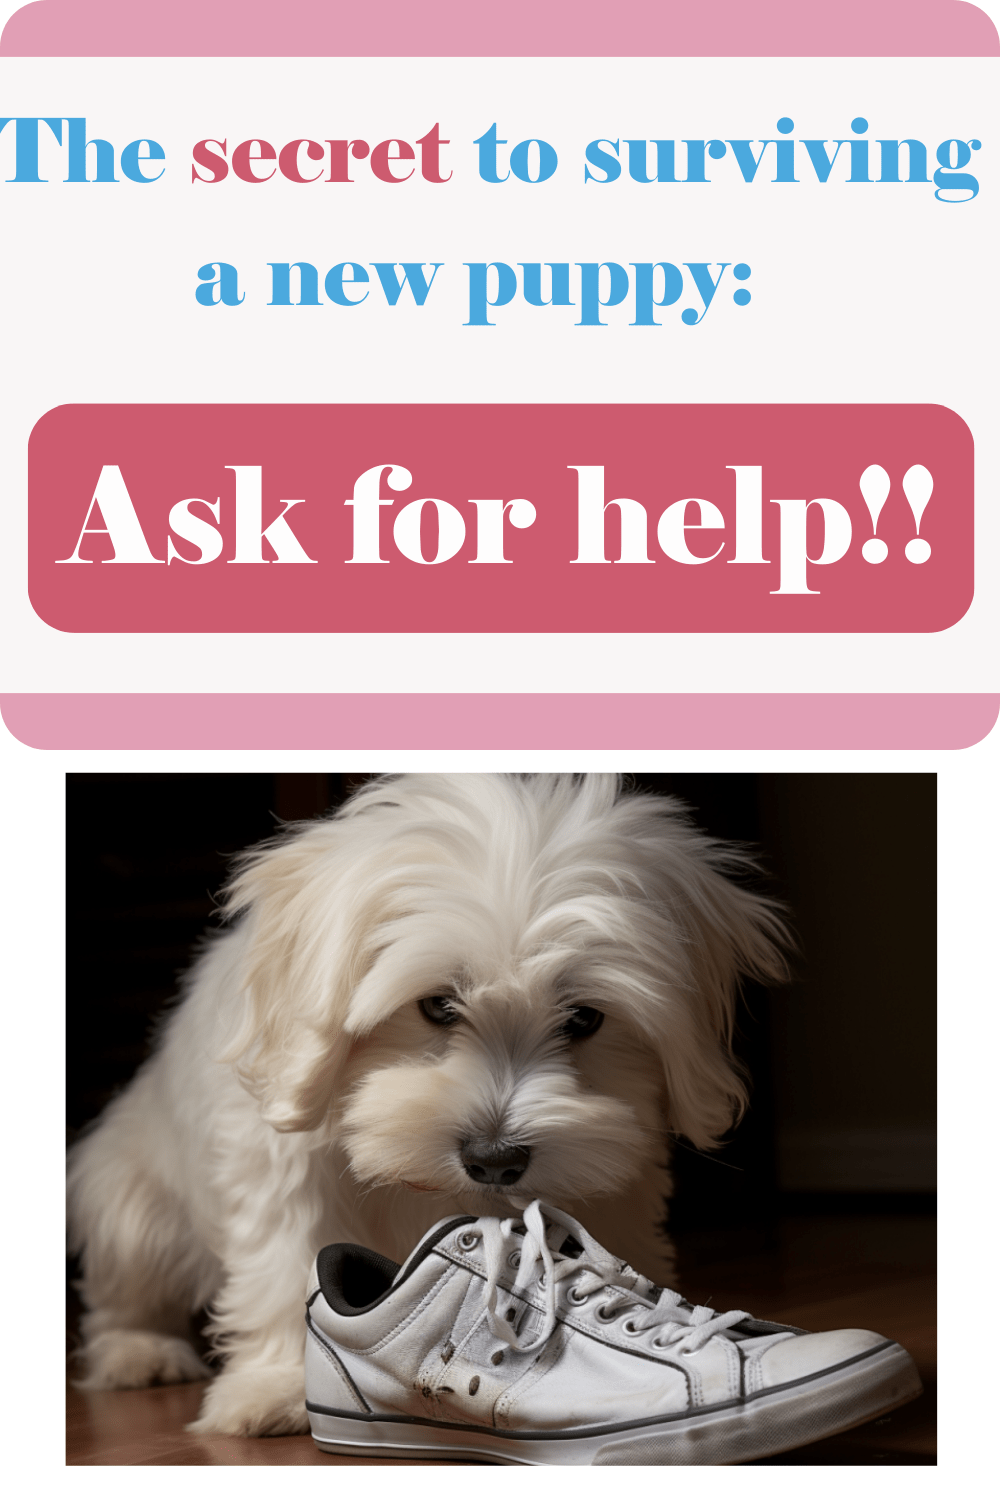 You don’t have to struggle with new puppy blues. Get support and for help with your new puppy!